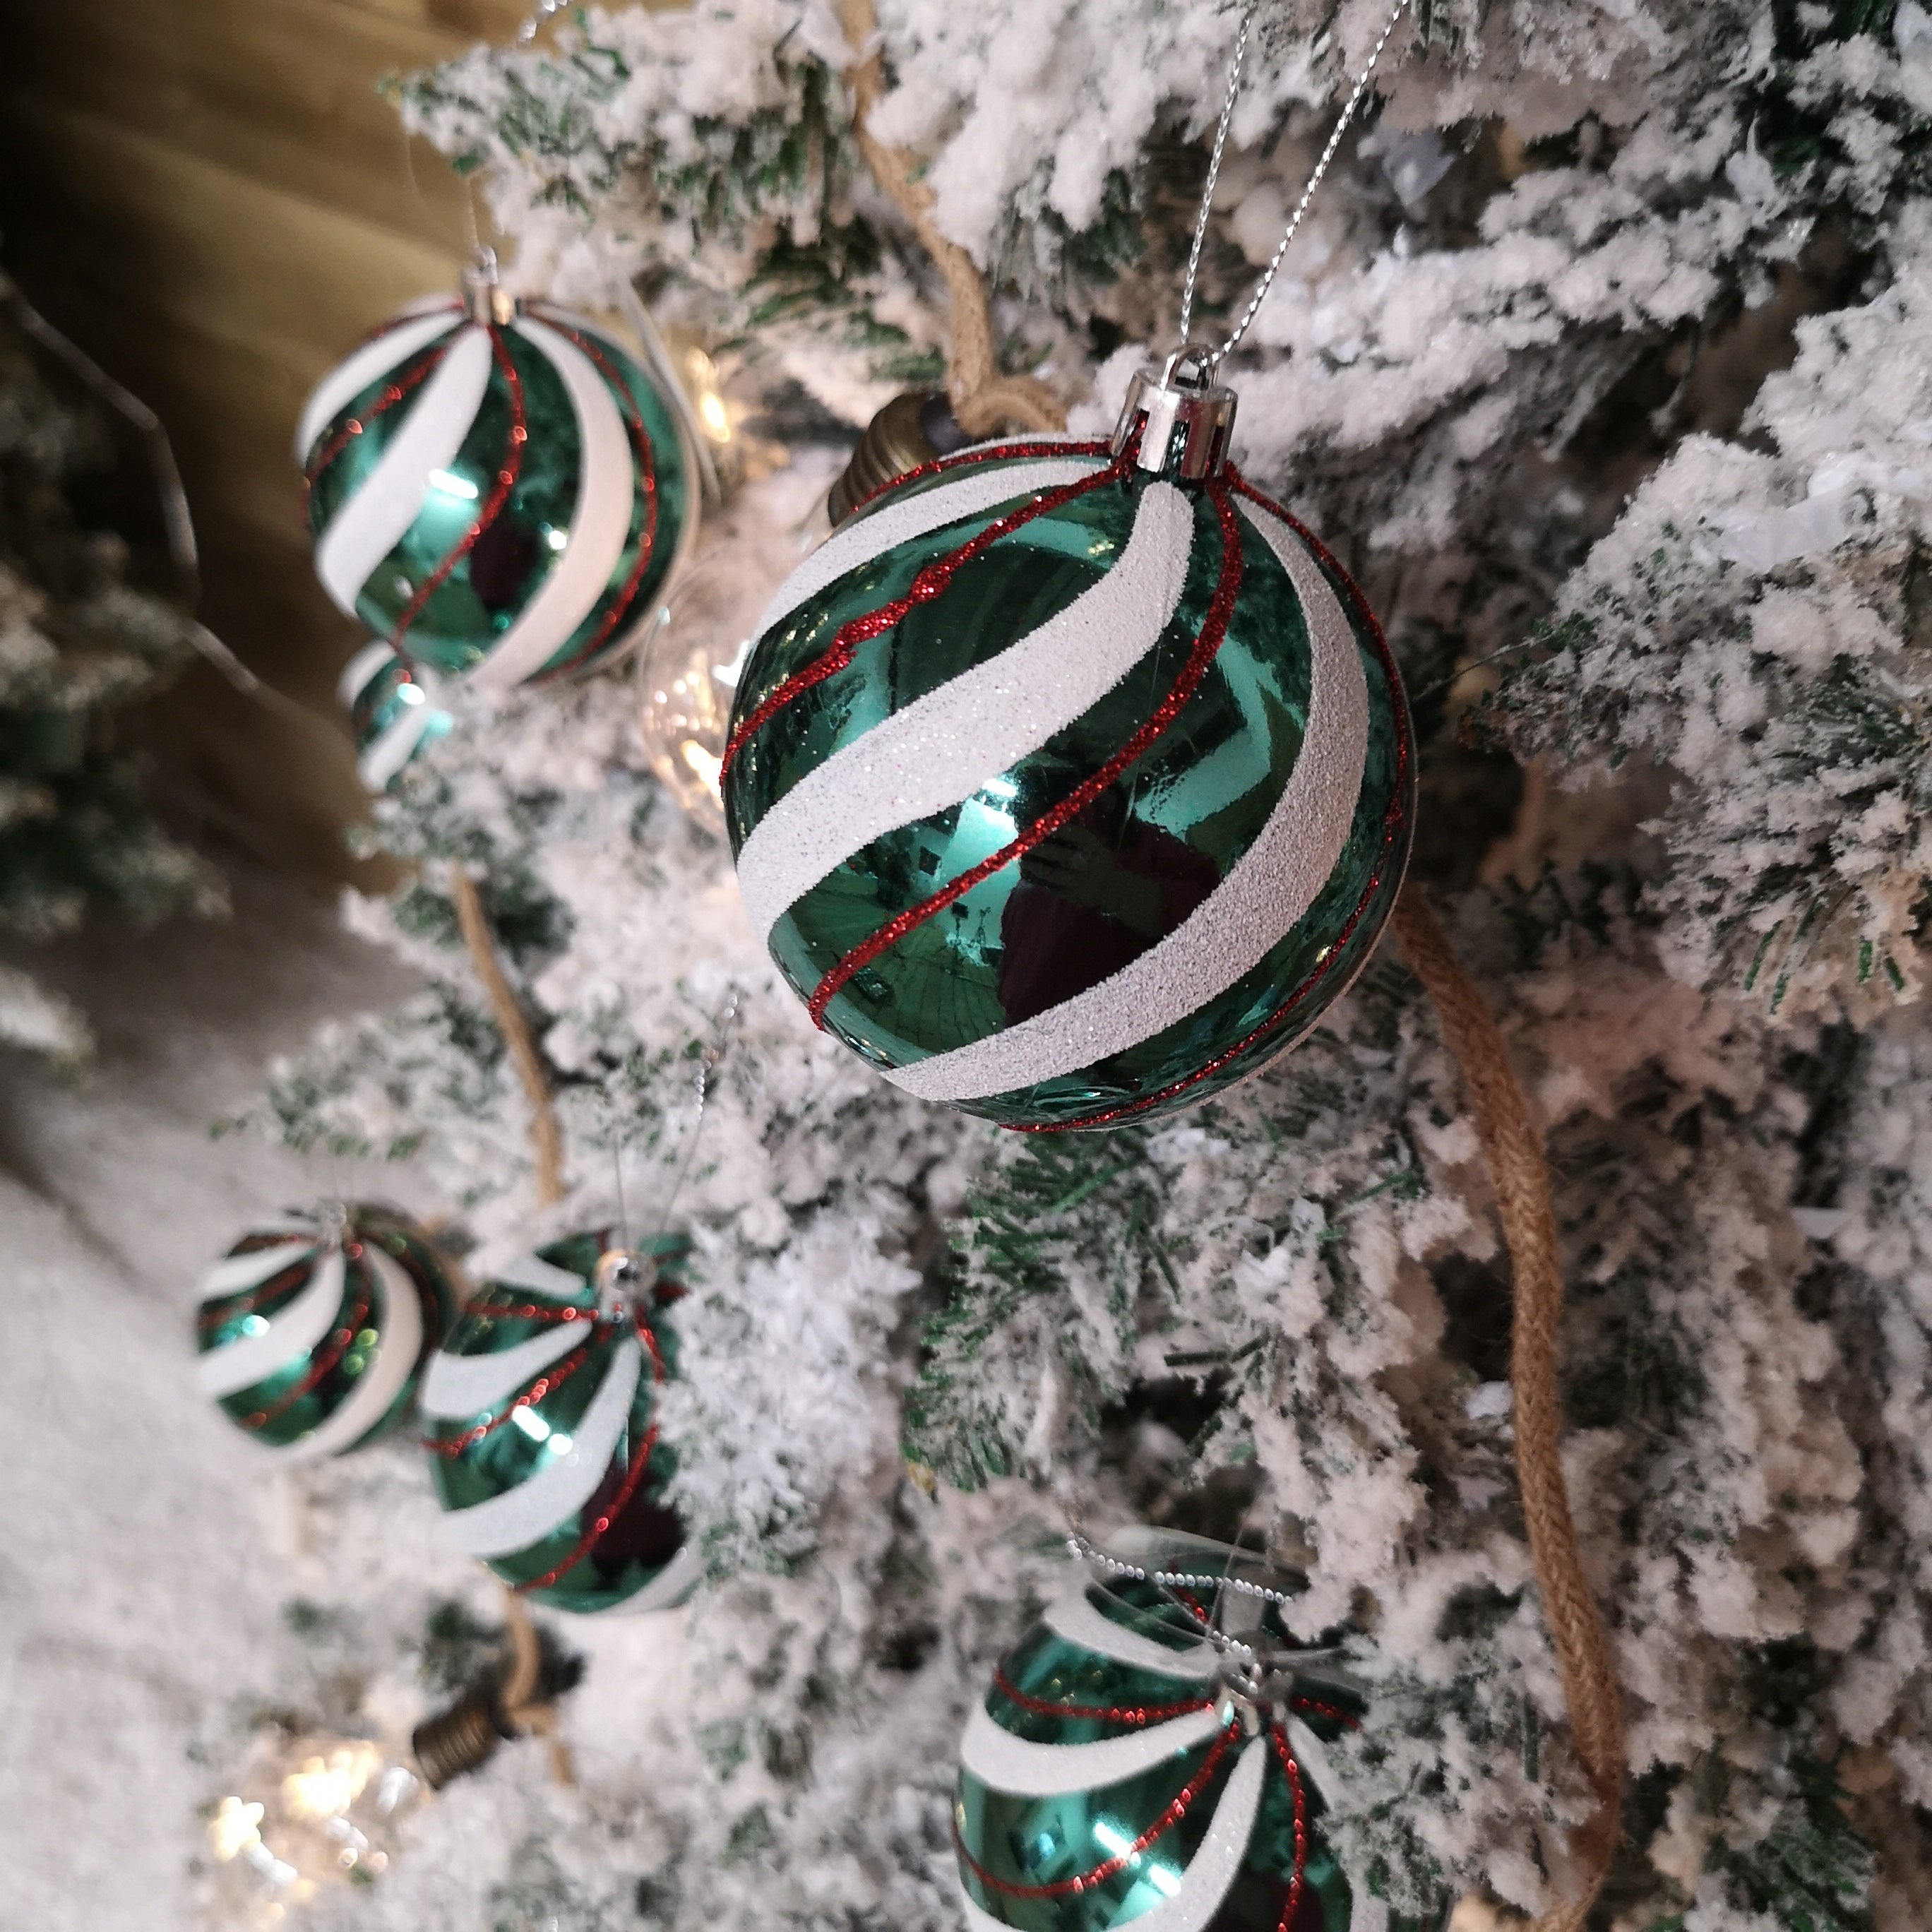 Box of 12 8cm Green with White and Red Glitter Shatterproof Christmas Bauble Decoration in PDQ